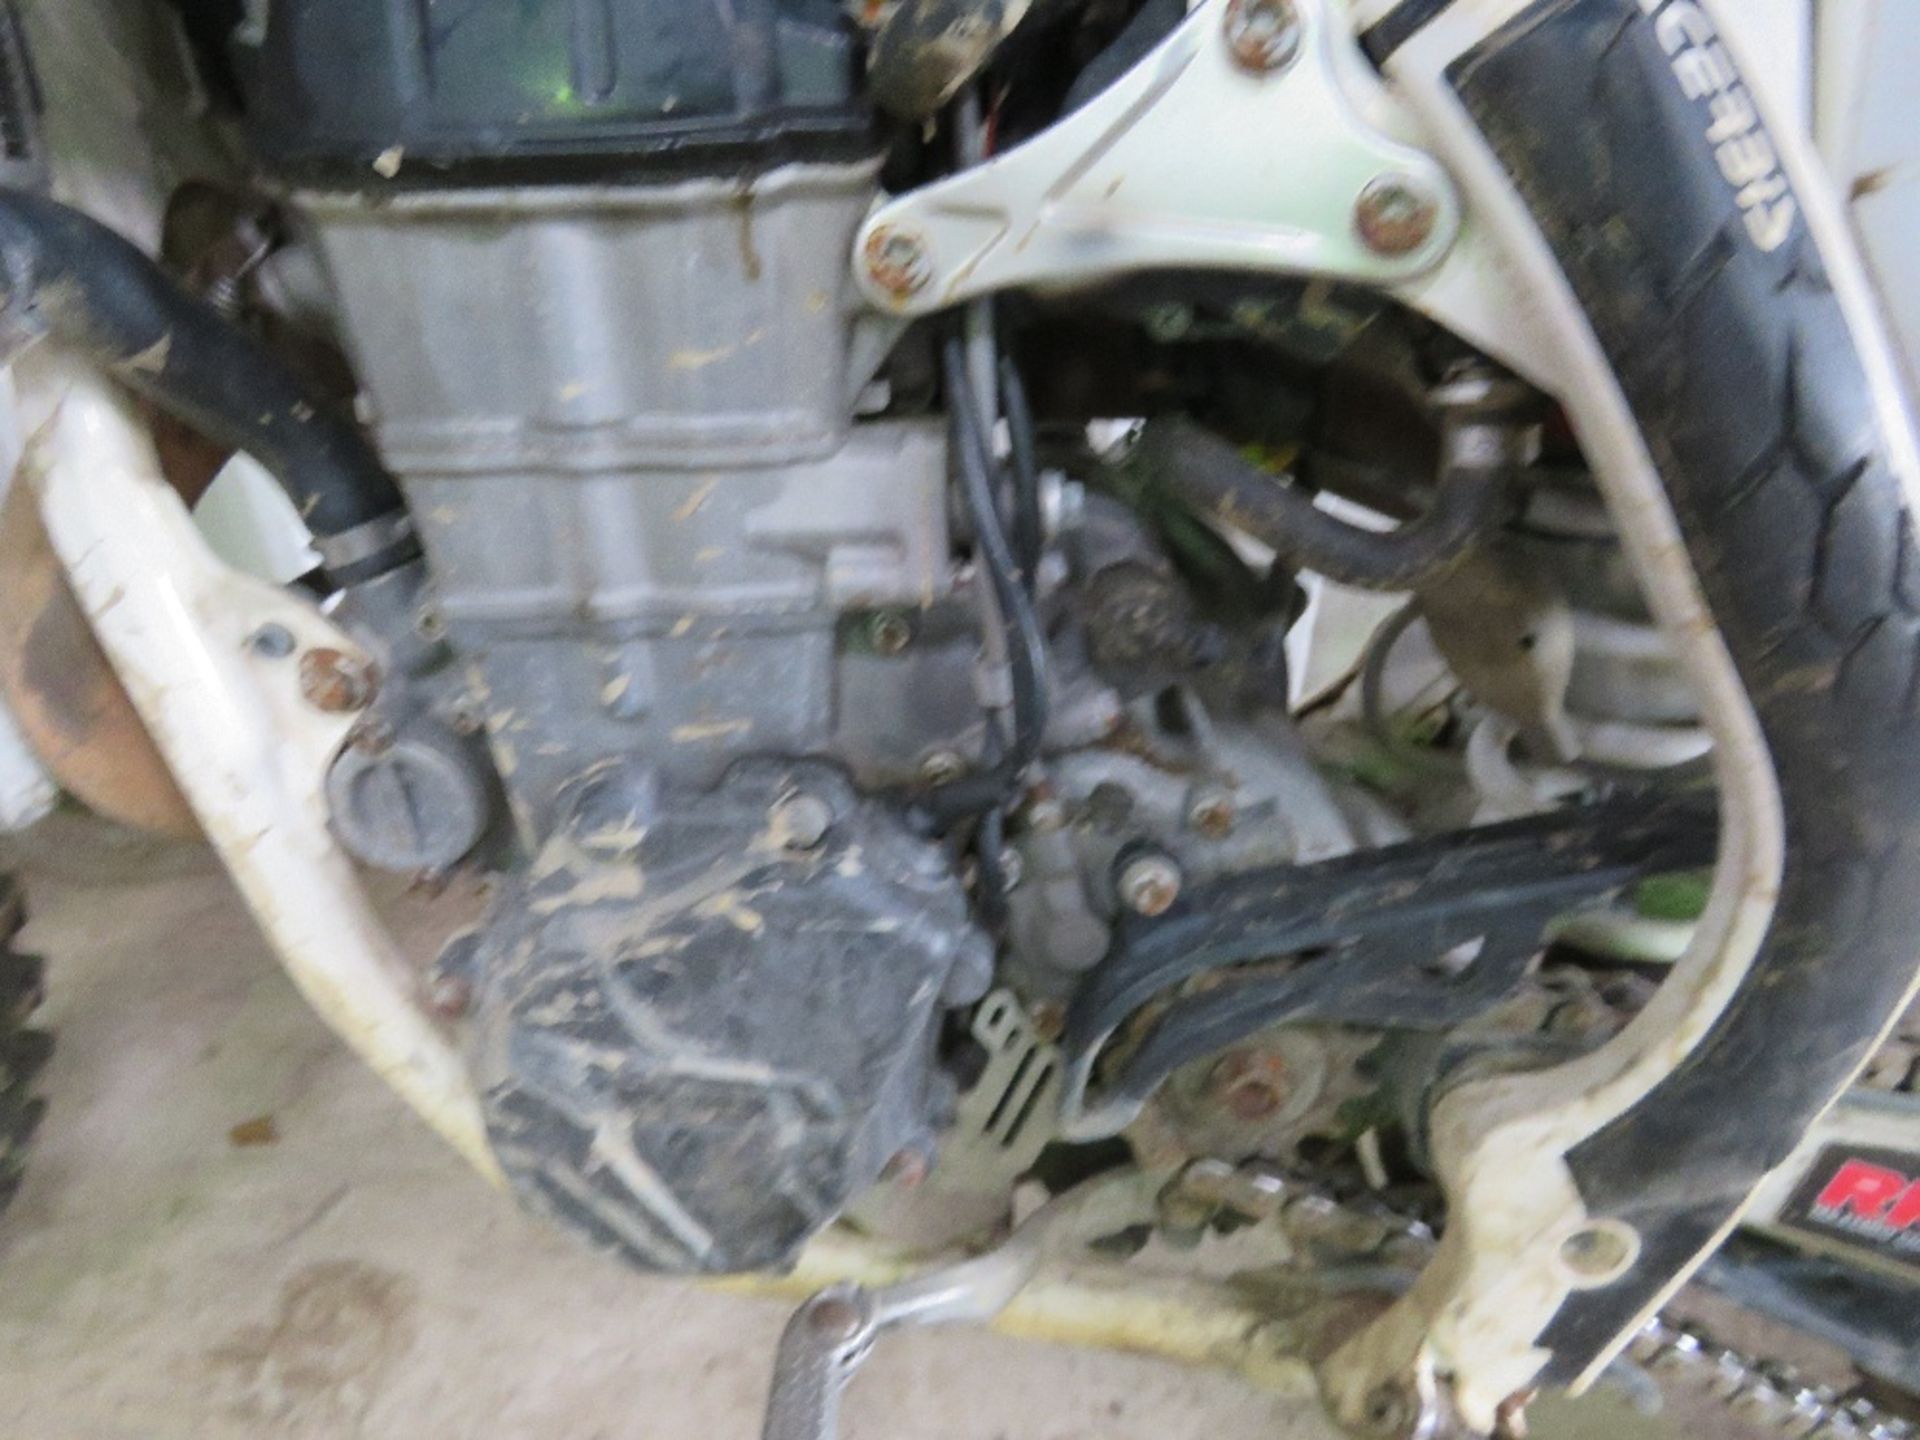 HUSQVARNA 450CC TRIALS BIKE, REG:LK18 EXO WITH V5 (FIRST ROAD REGISTERED 2021). WHEN TESTED WAS SEE - Image 4 of 15